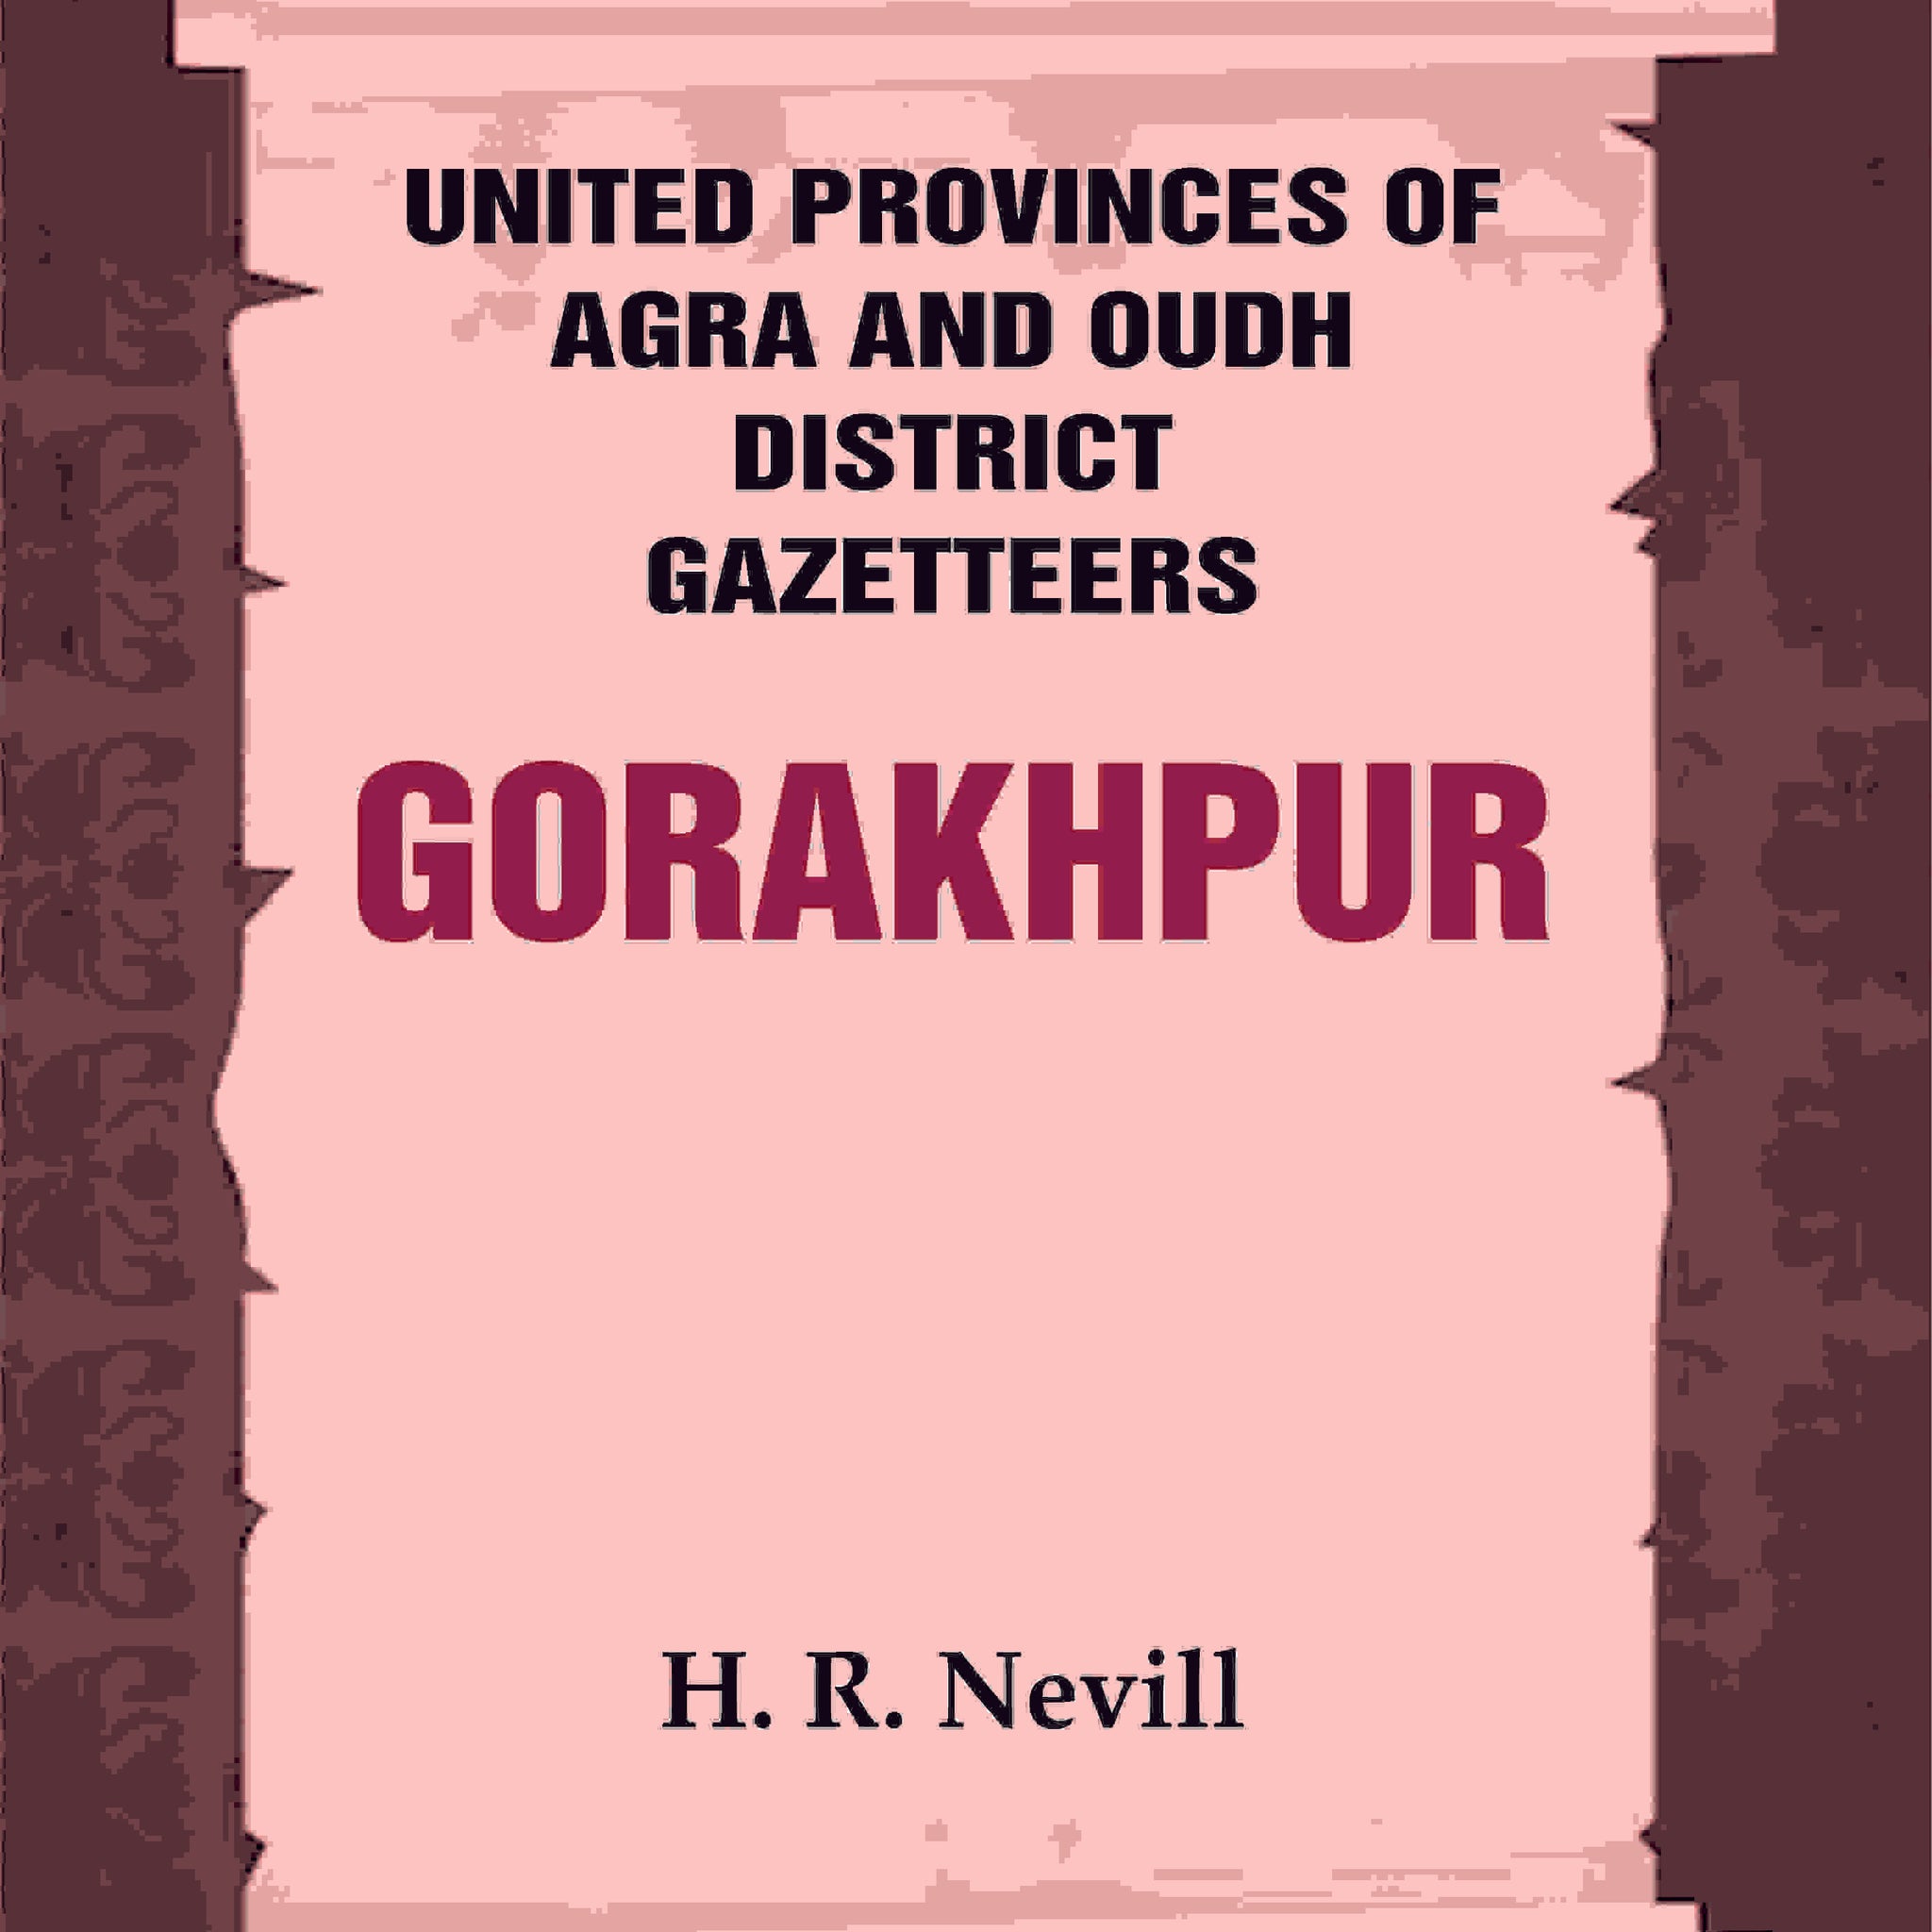 United Provinces of Agra and Oudh District Gazetteers: Gorakhpur